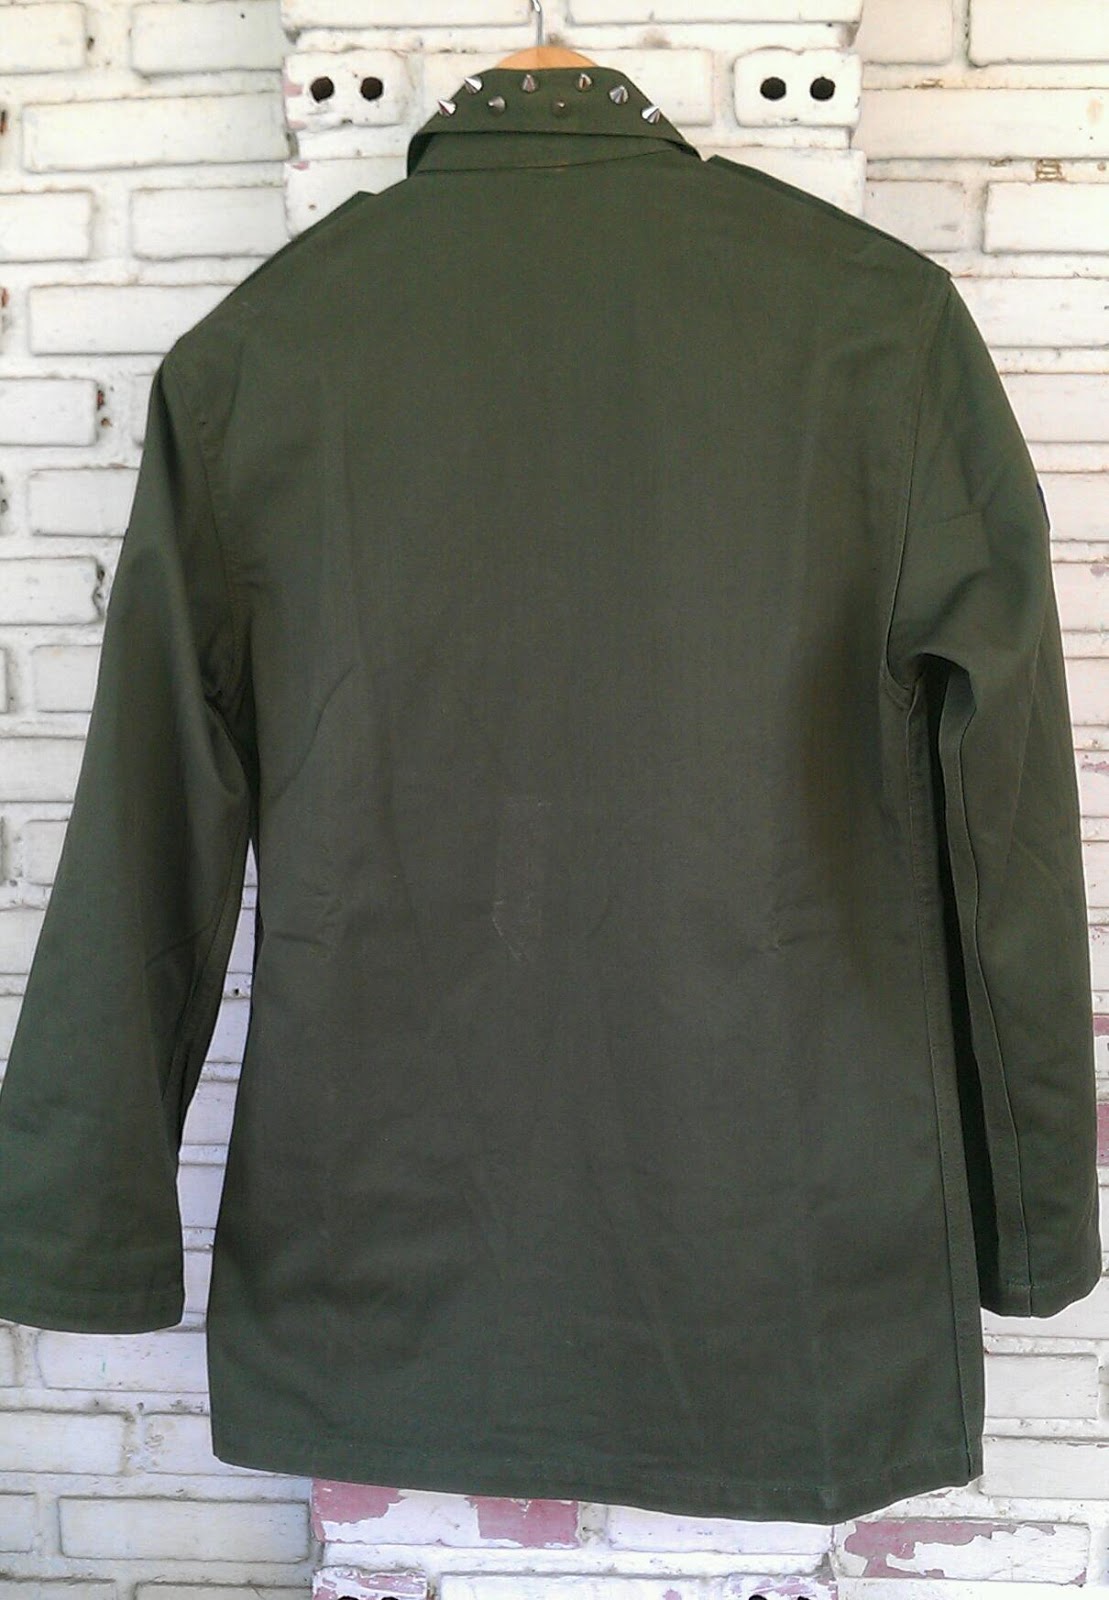 Reworked Studded Vintage Green Army Jacket size: M